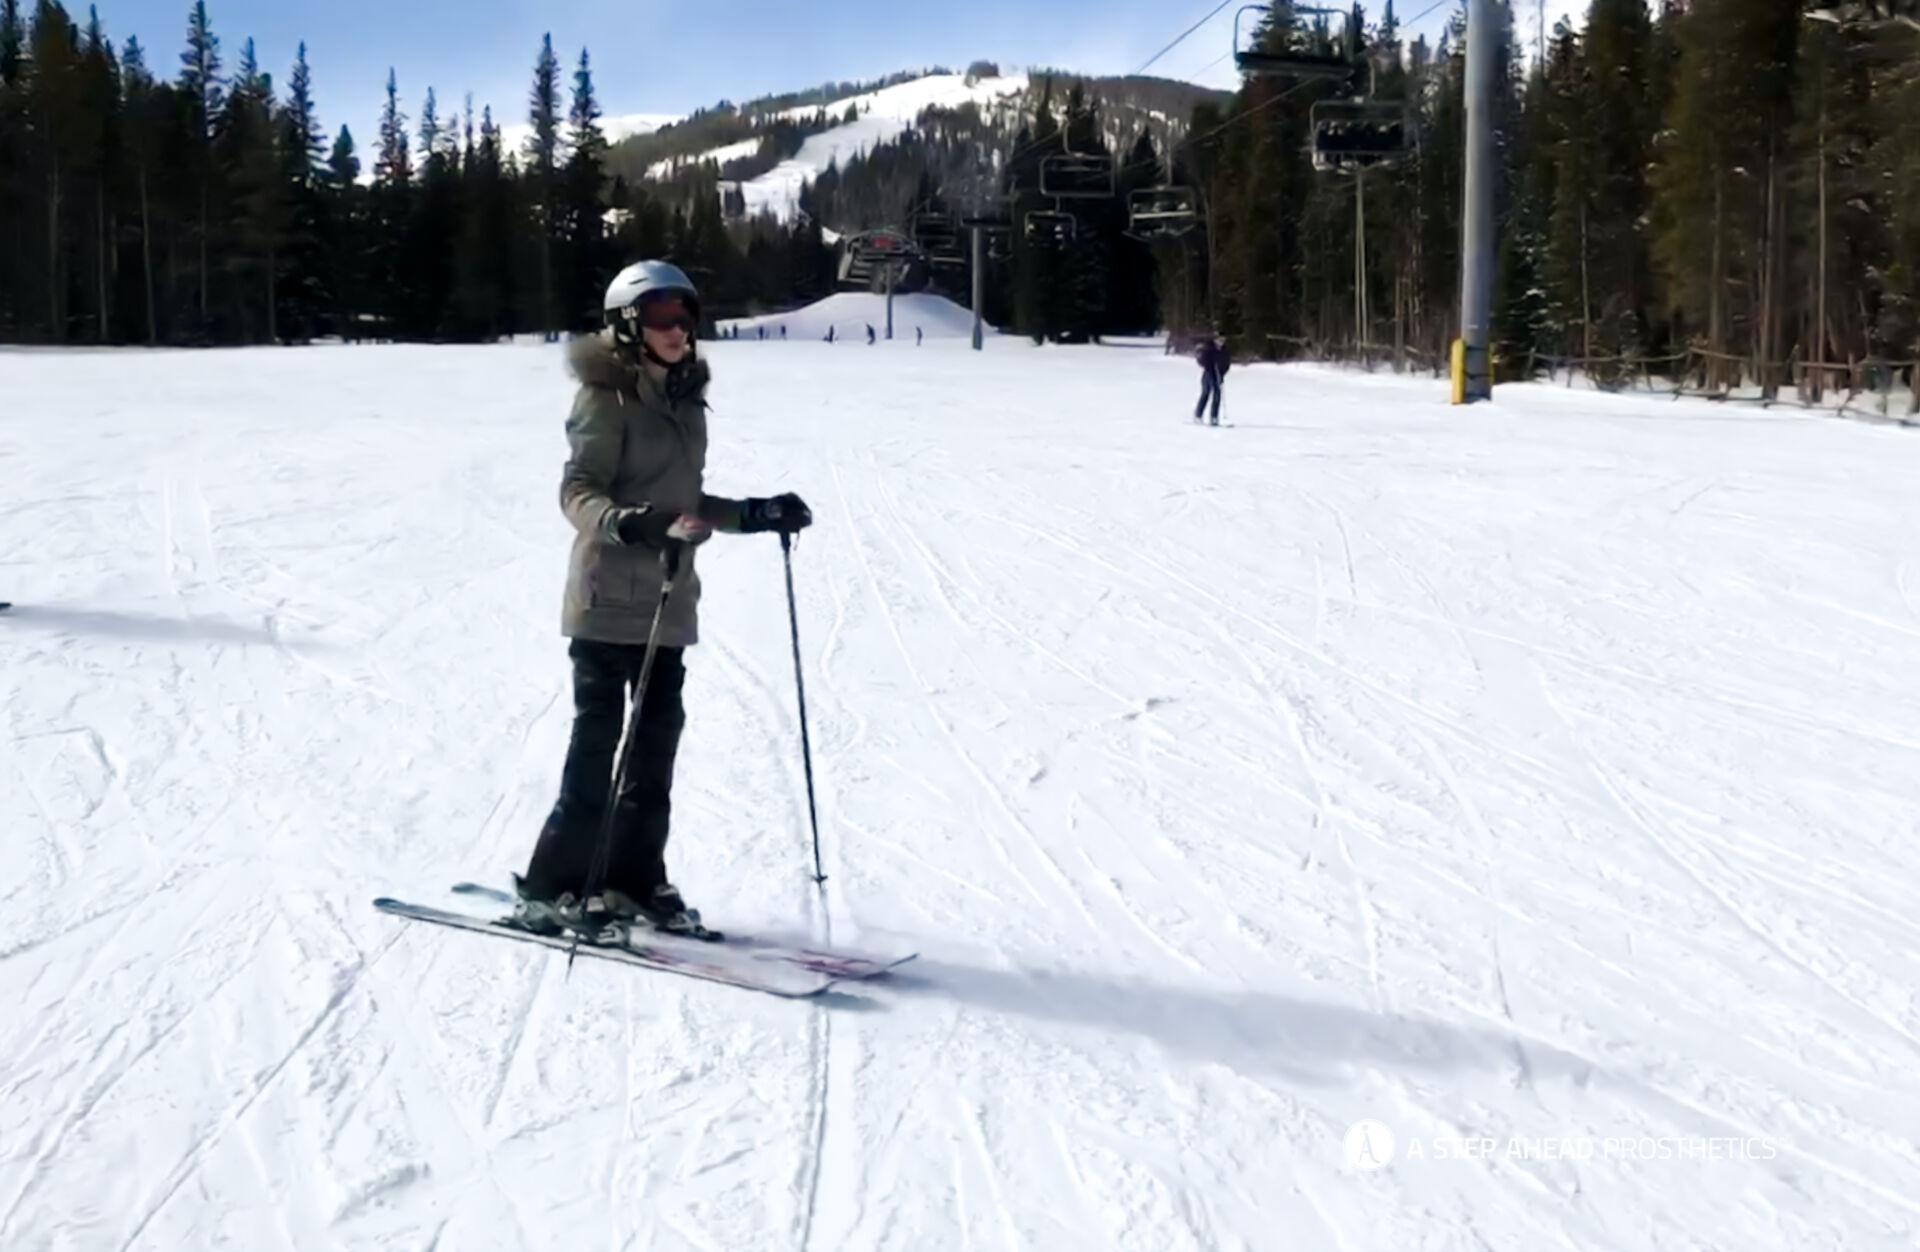 Skiing as as a quadruple amputee